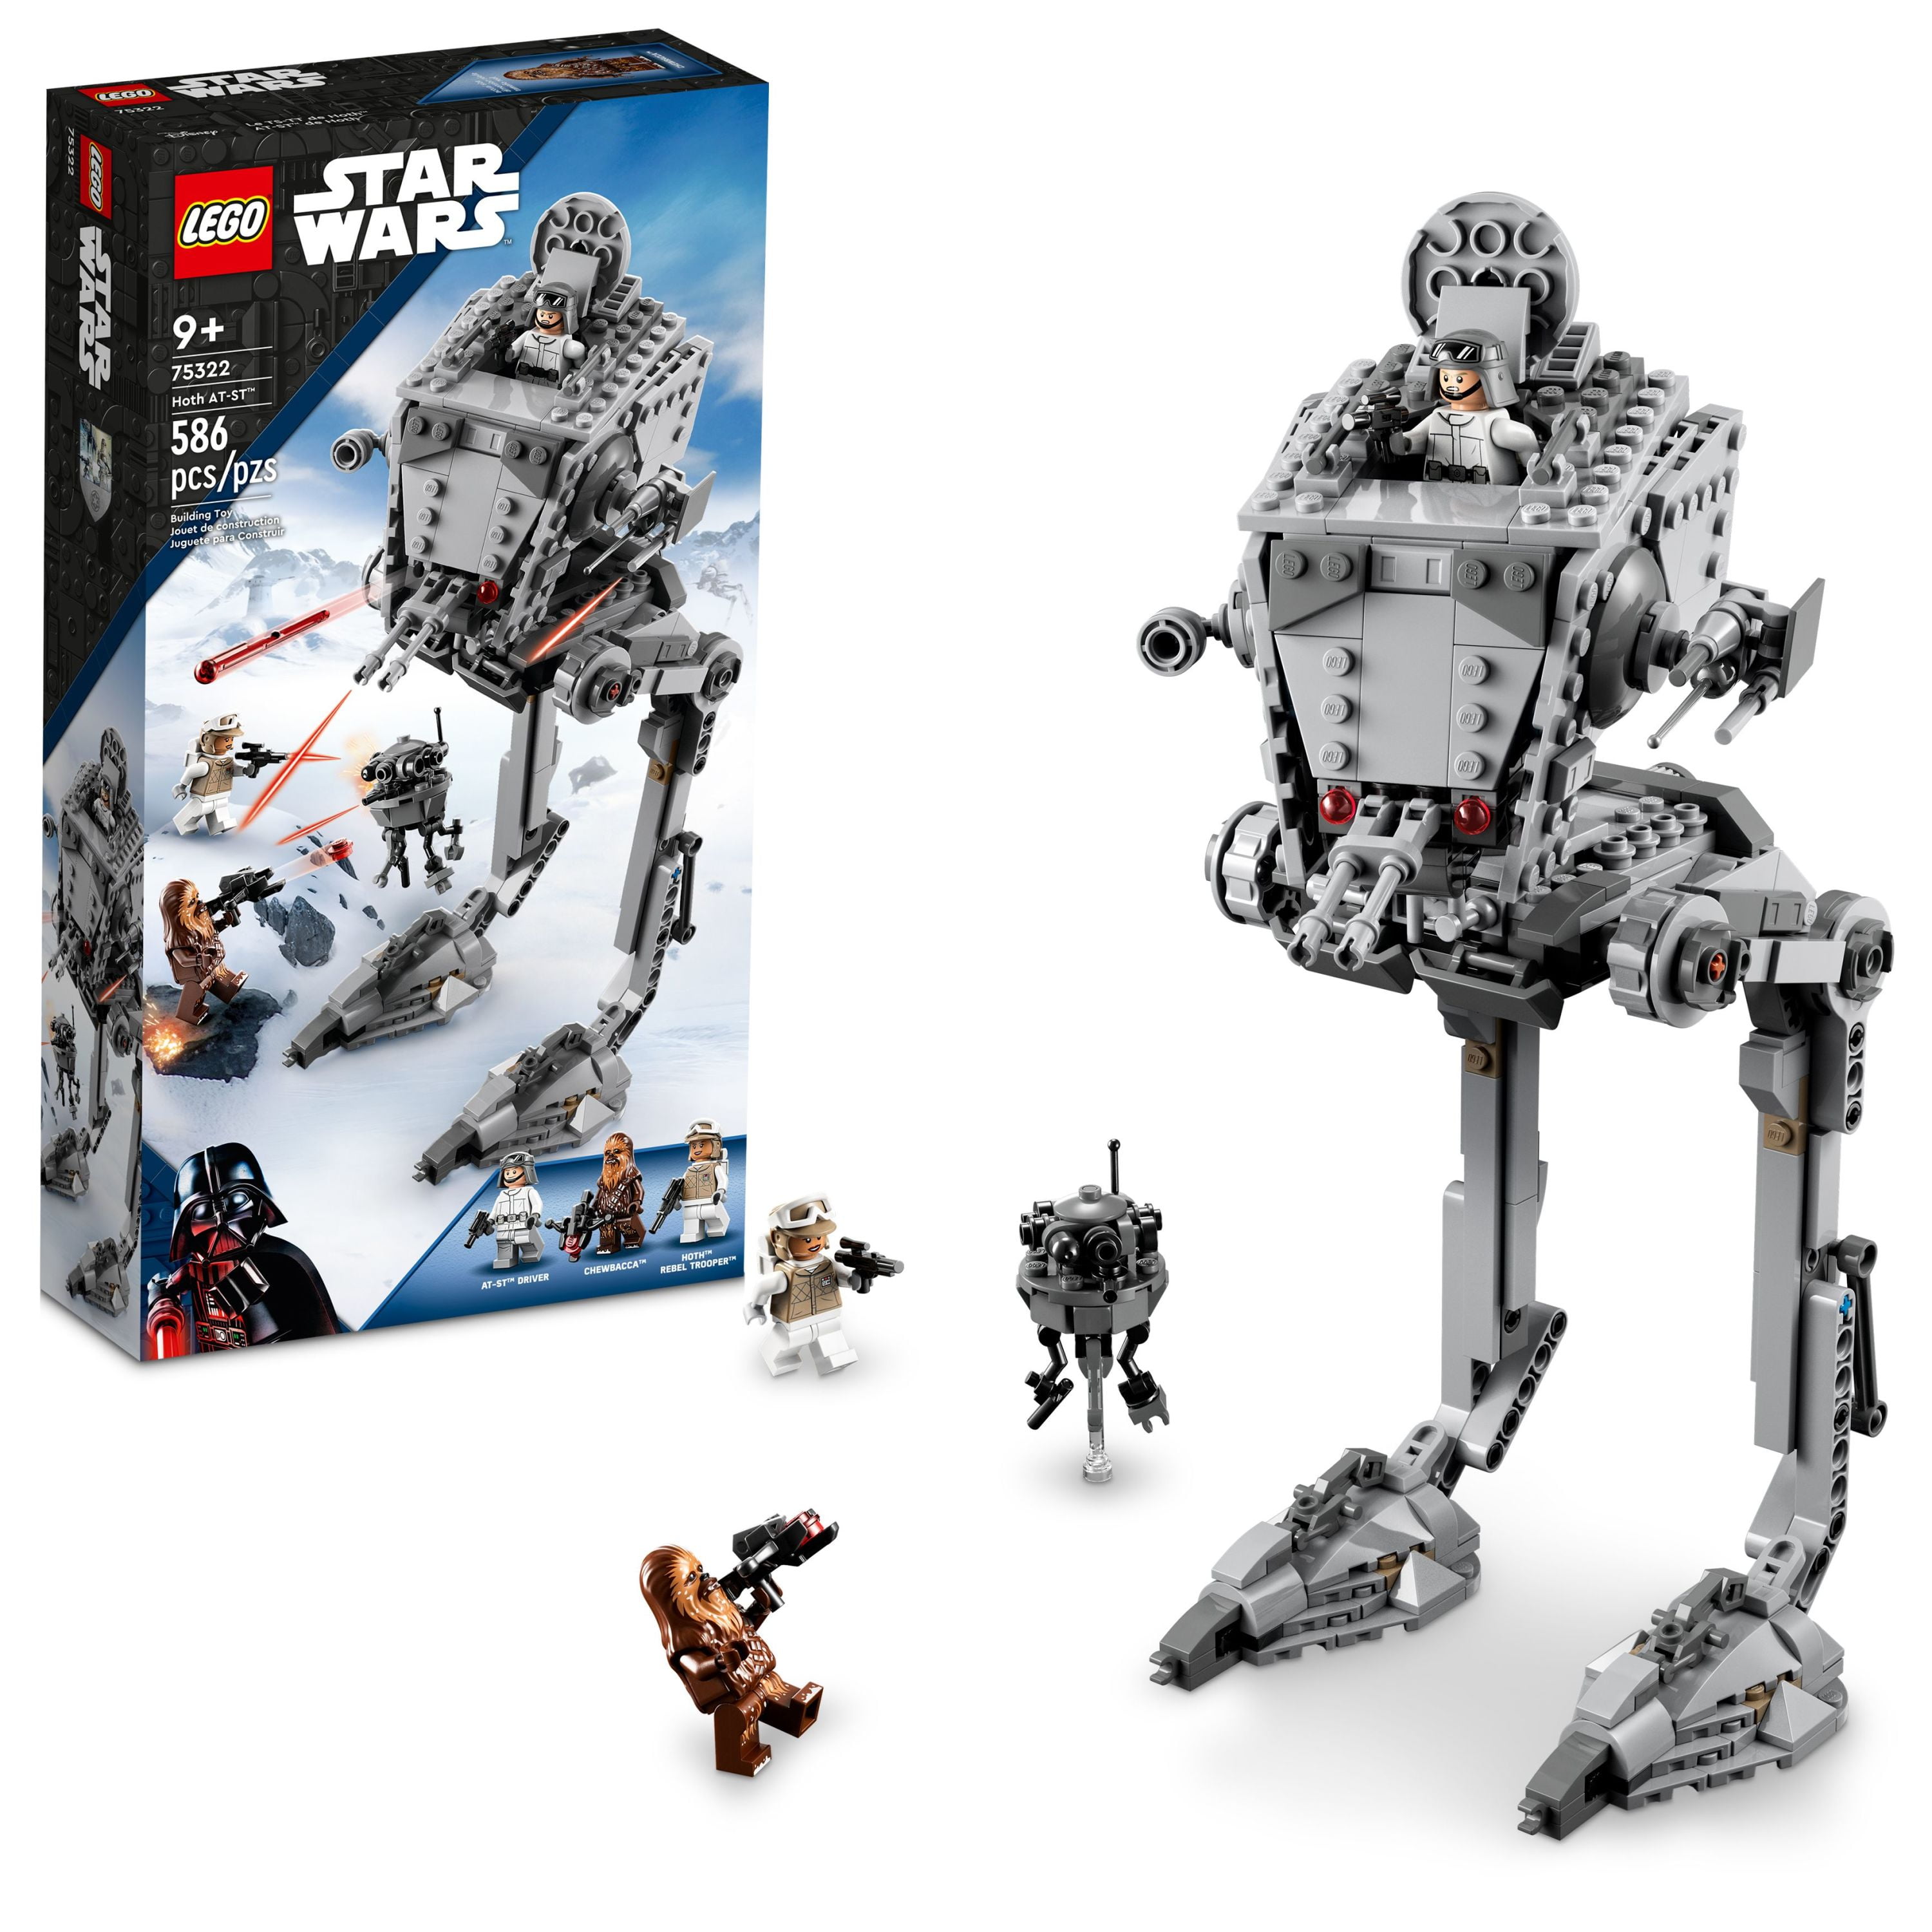 LEGO Star Wars Hoth AT-ST 75322 Building Kit; Construction Toy for Kids Aged 9 and Up, with a Buildable Battle of Hoth AT-ST Walker and 4 Star Wars: The Empire Strikes Back Characters (586 Pieces)